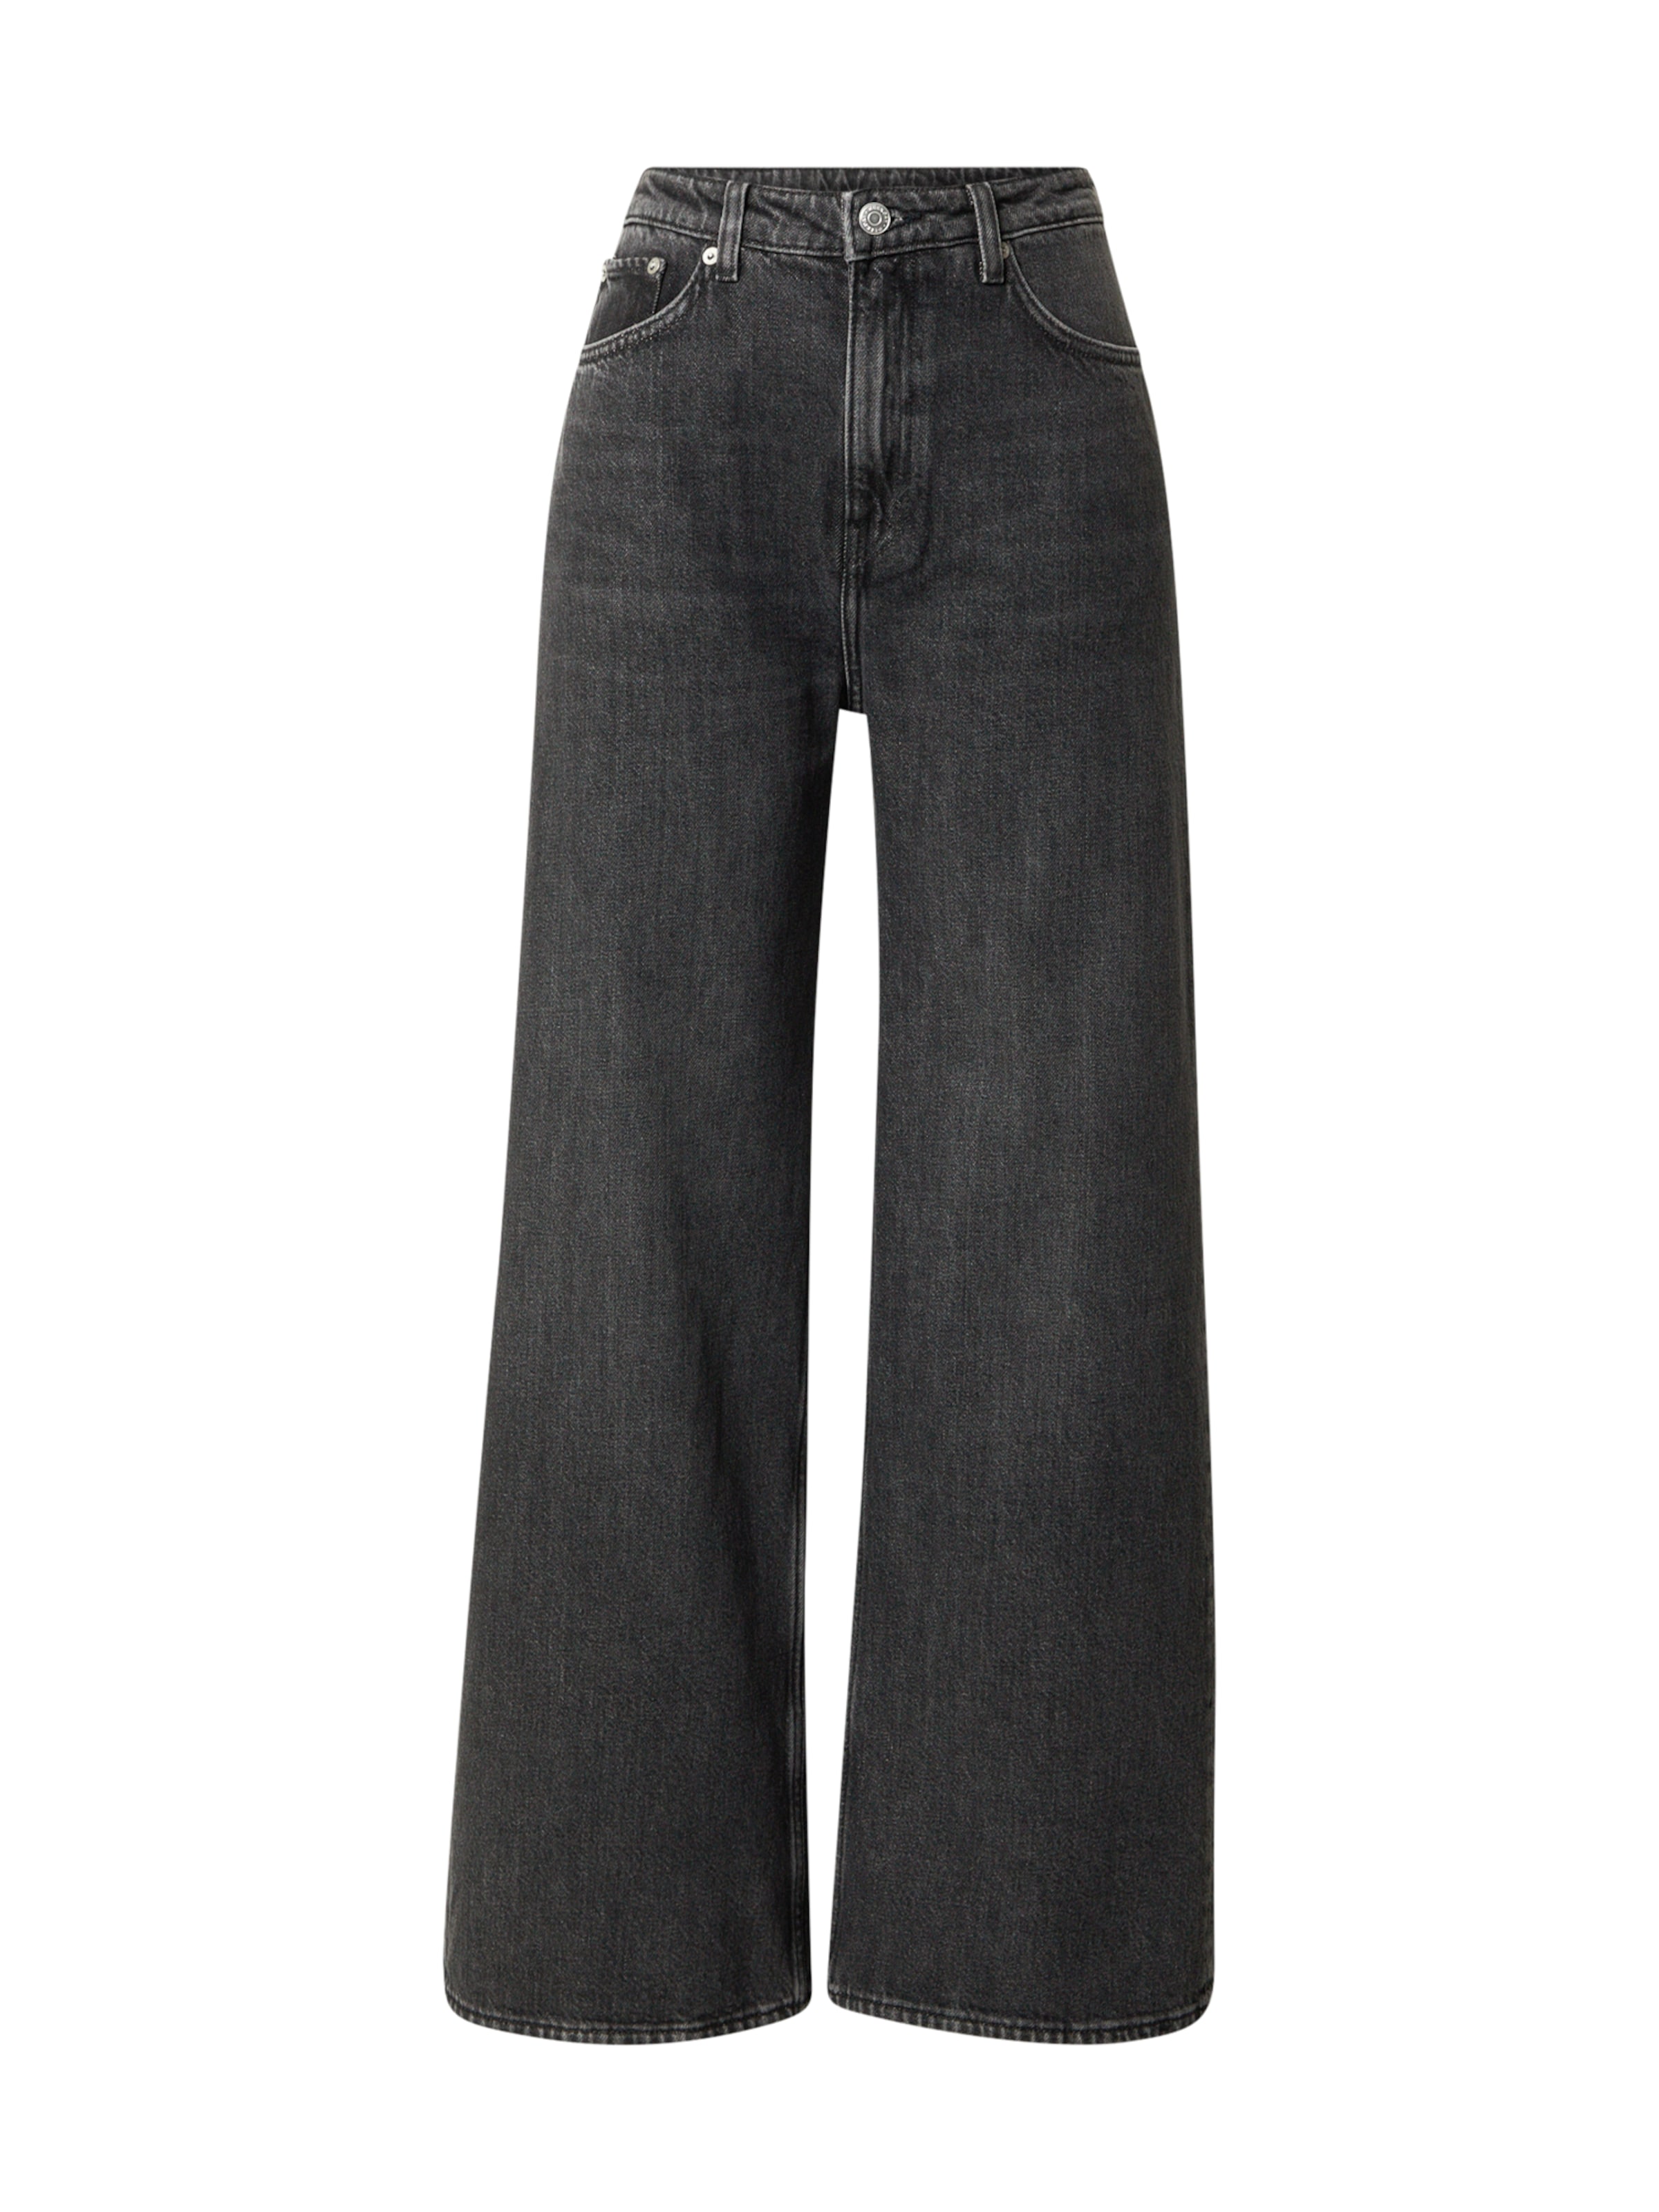 PROMO Donna WEEKDAY Jeans Ace Summer in Nero 